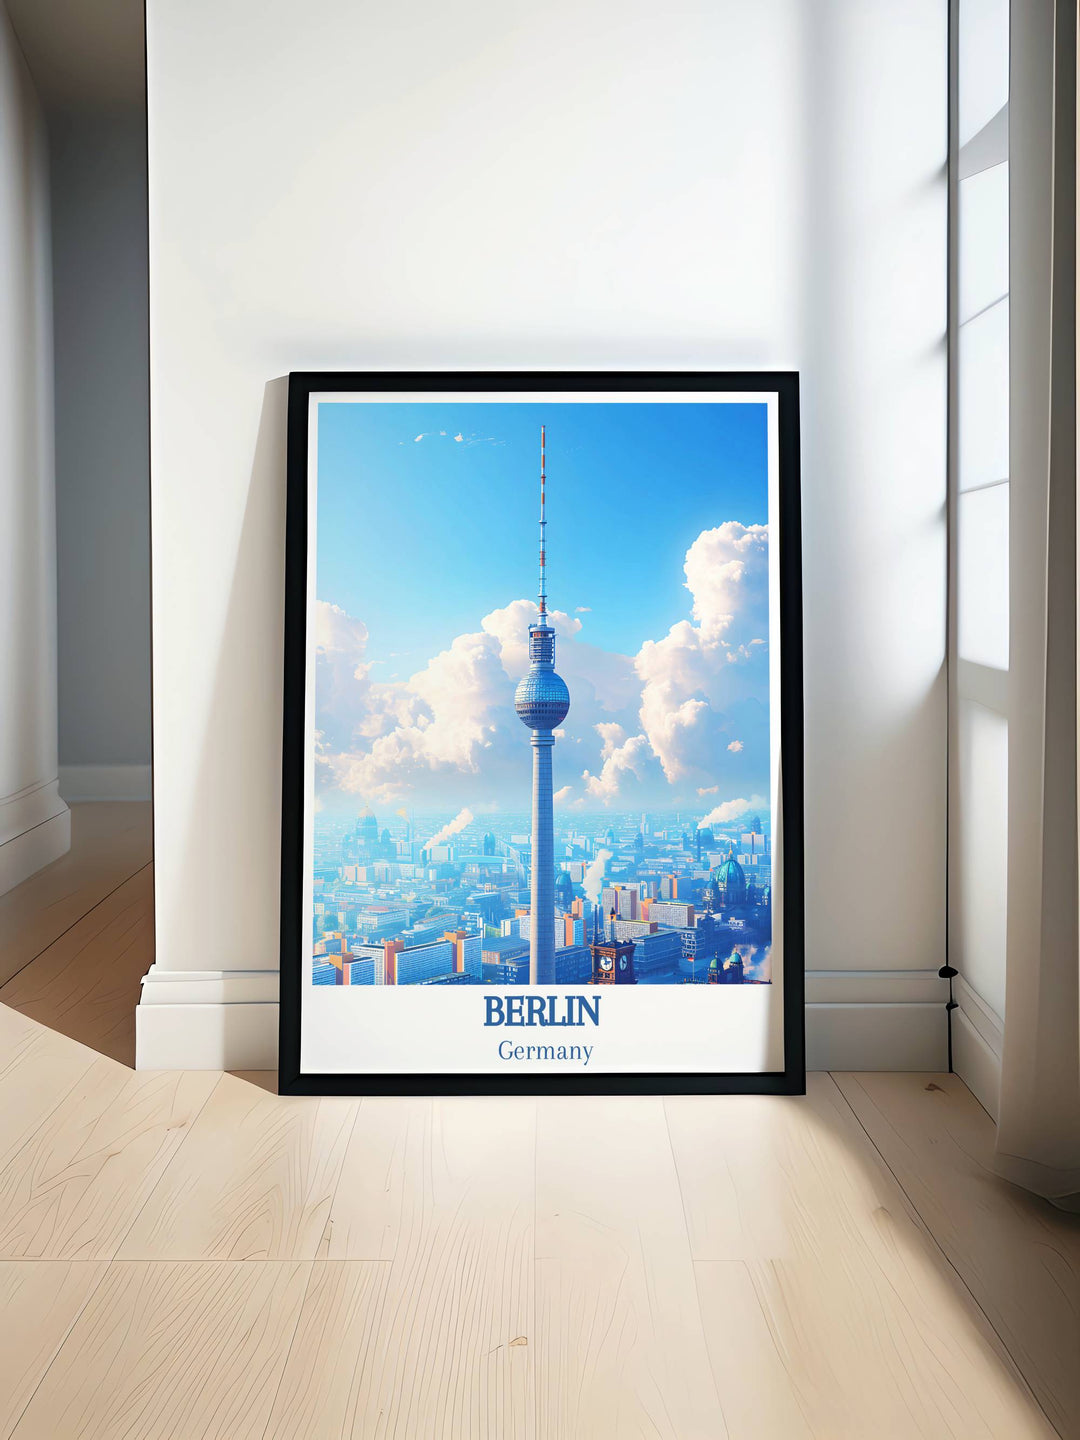 Germany home decor print focusing on the Berliner Fernsehturm a symbol of unity and innovation in Berlin art.